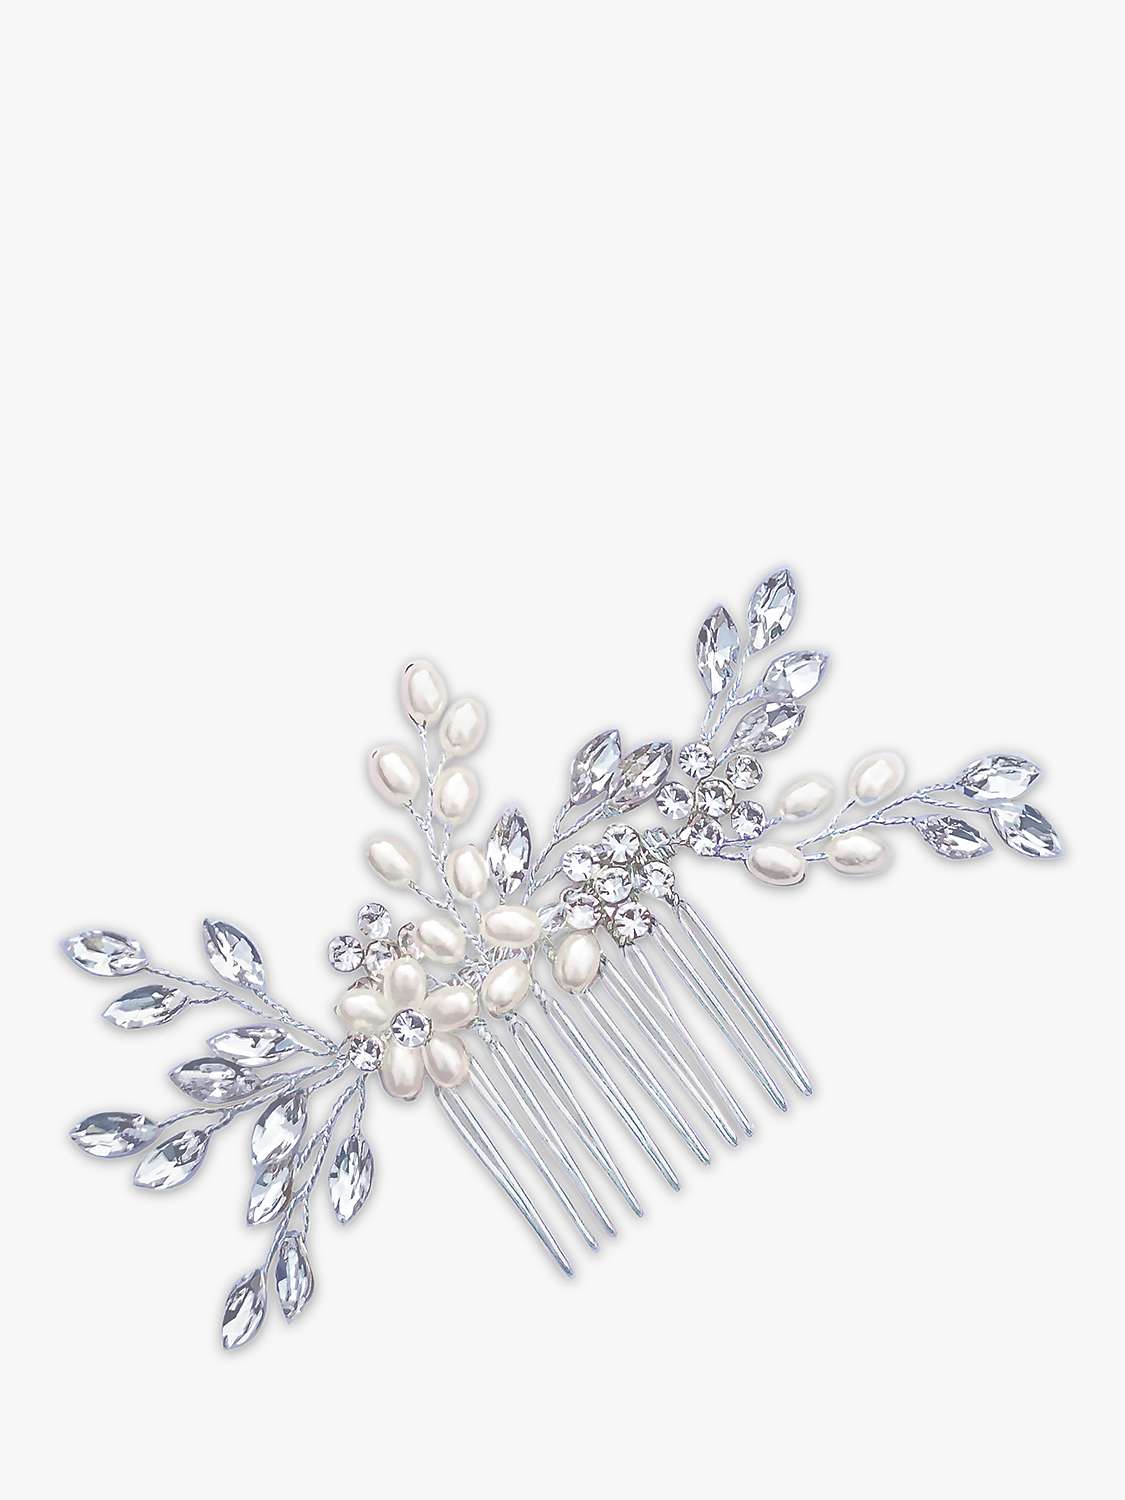 Buy Ivory & Co. Shimmer Crystal Silver Plated Hair Slide, Silver Online at johnlewis.com